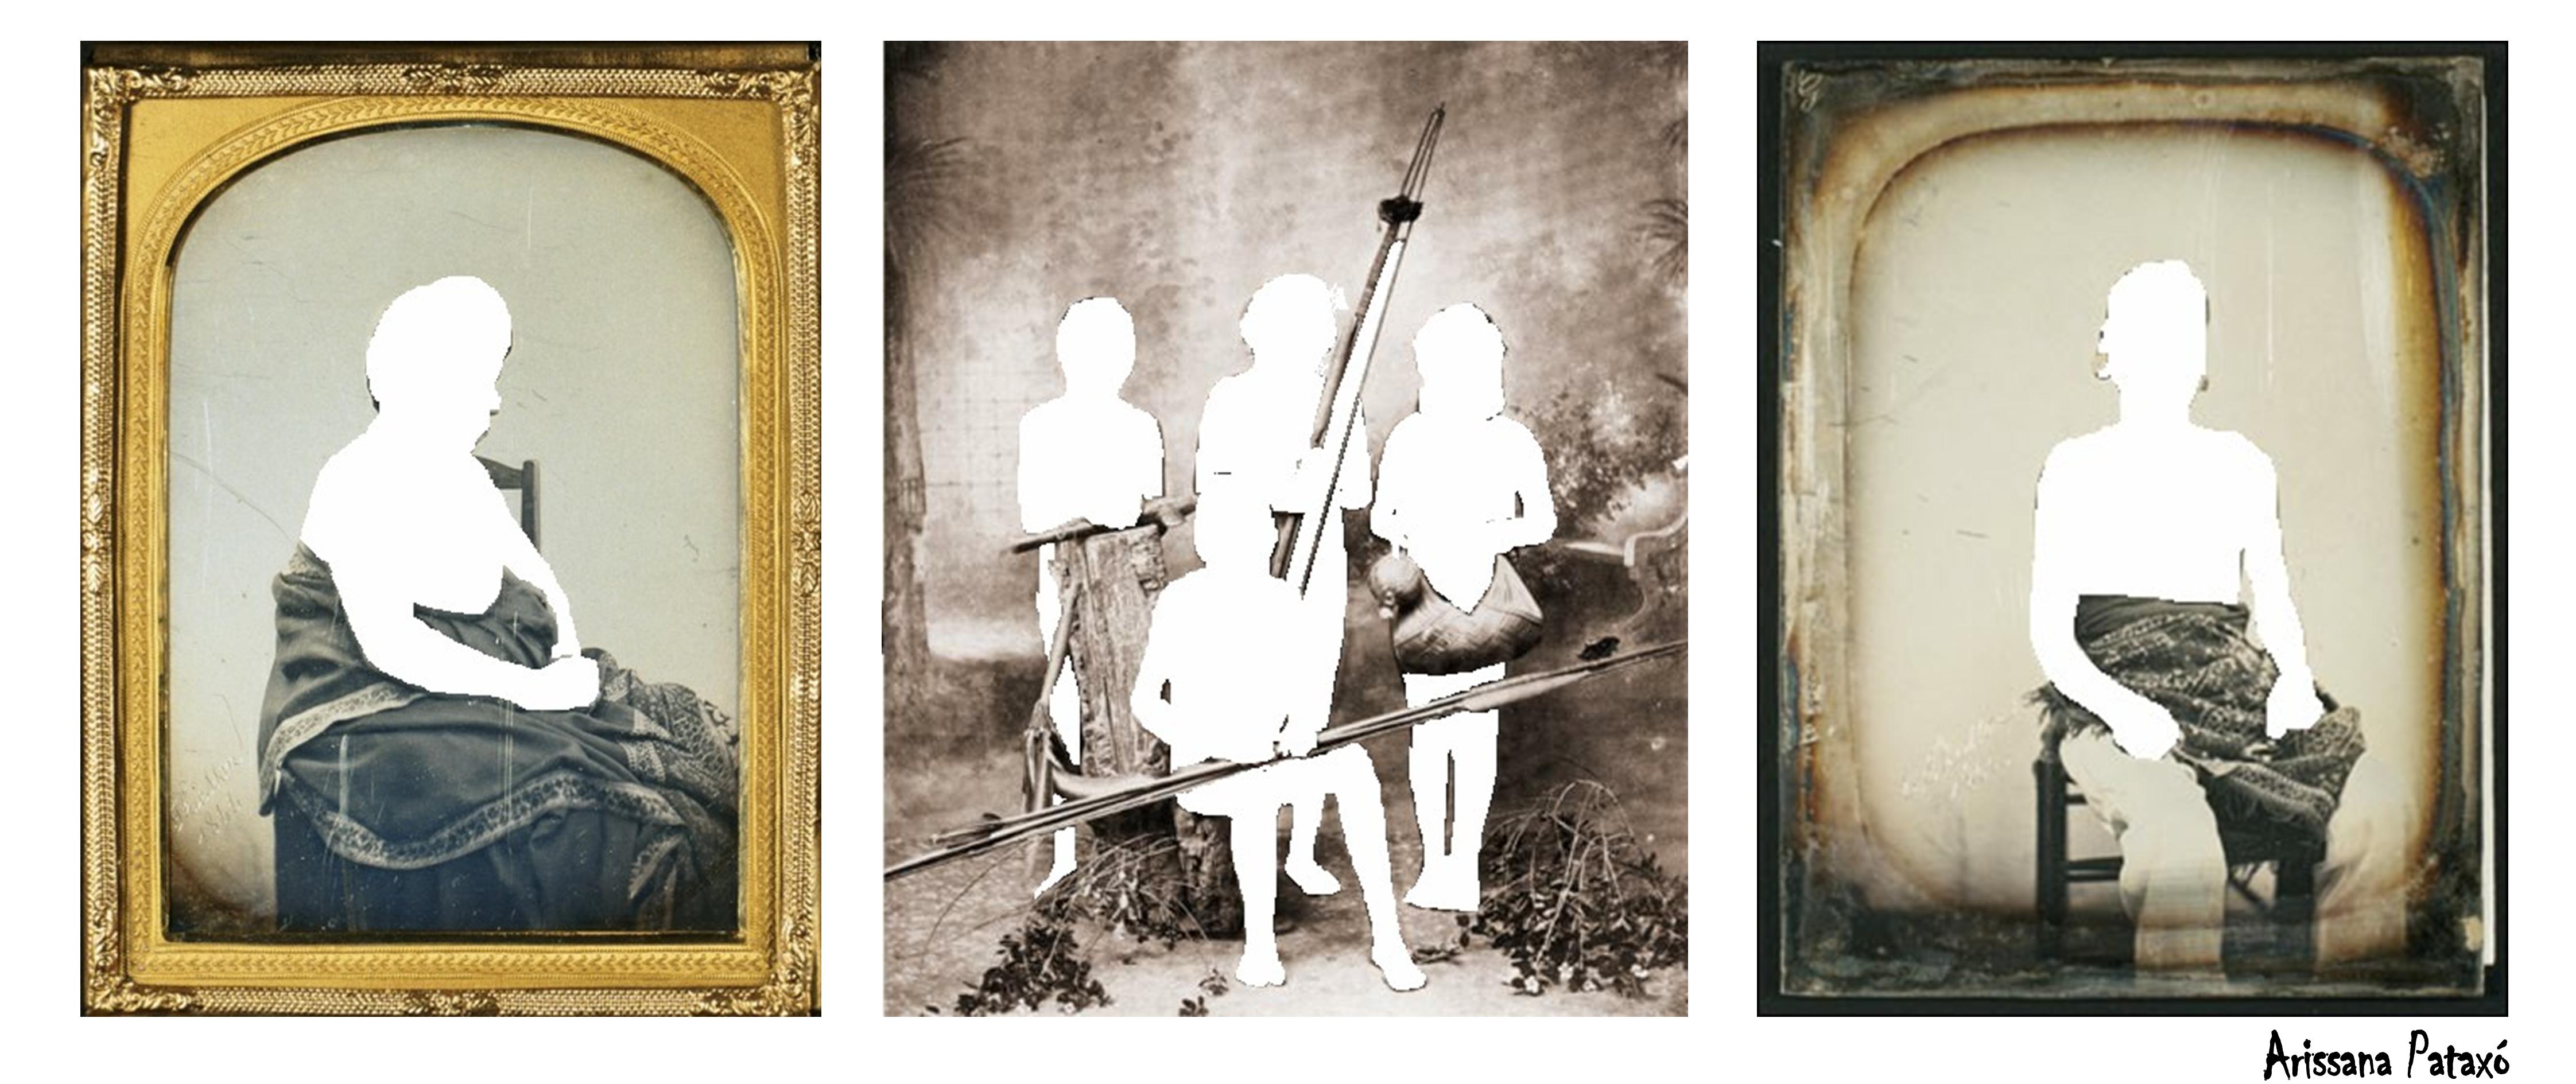 Three photographs of indigenous people with their bodies and faces erased.